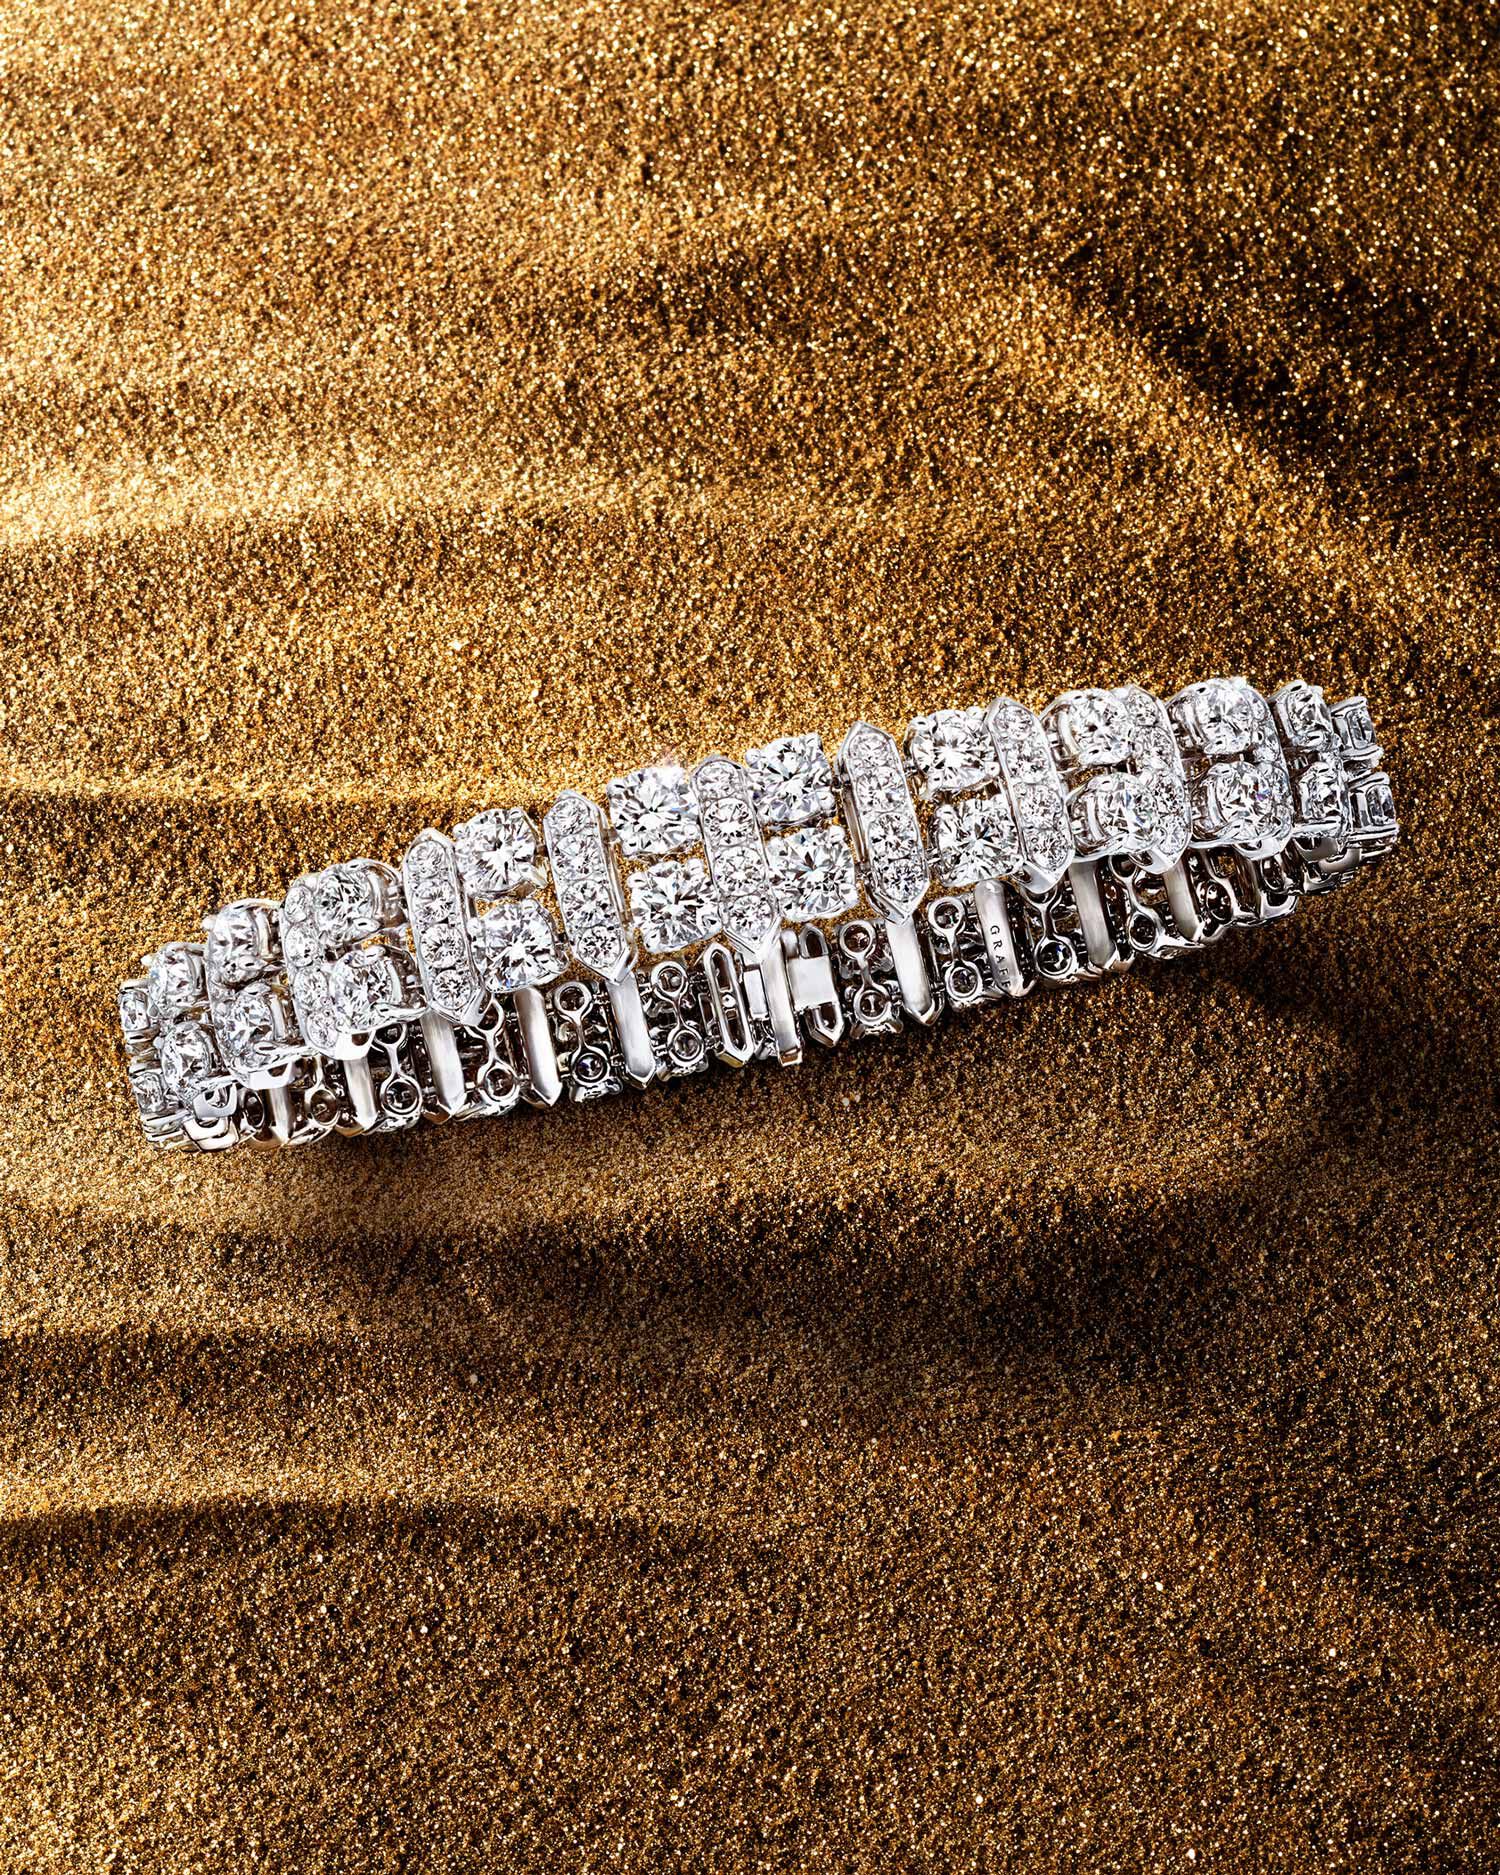 Diamond Night Moon high jewellery bracelet from the Graff Tribal collection